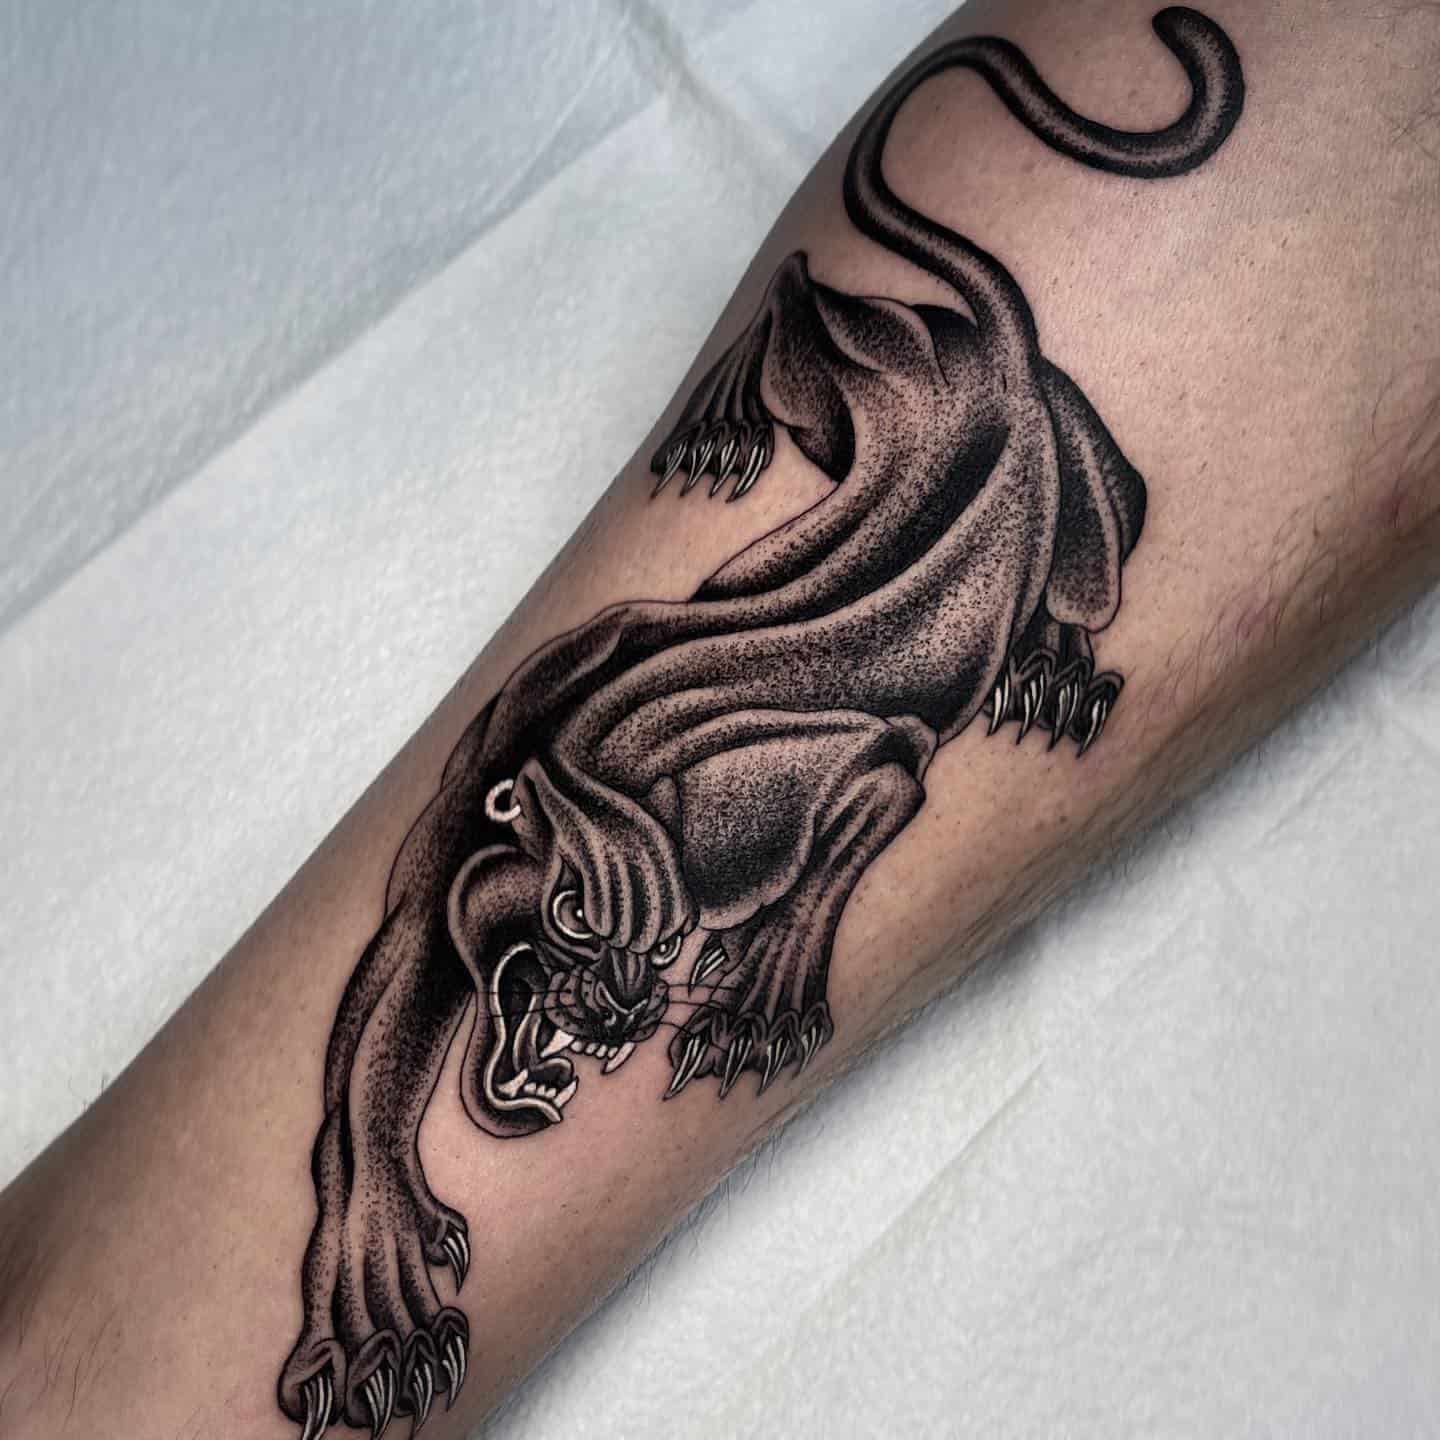 30 Incredible Panther Tattoo Ideas for Men & Women in 2023